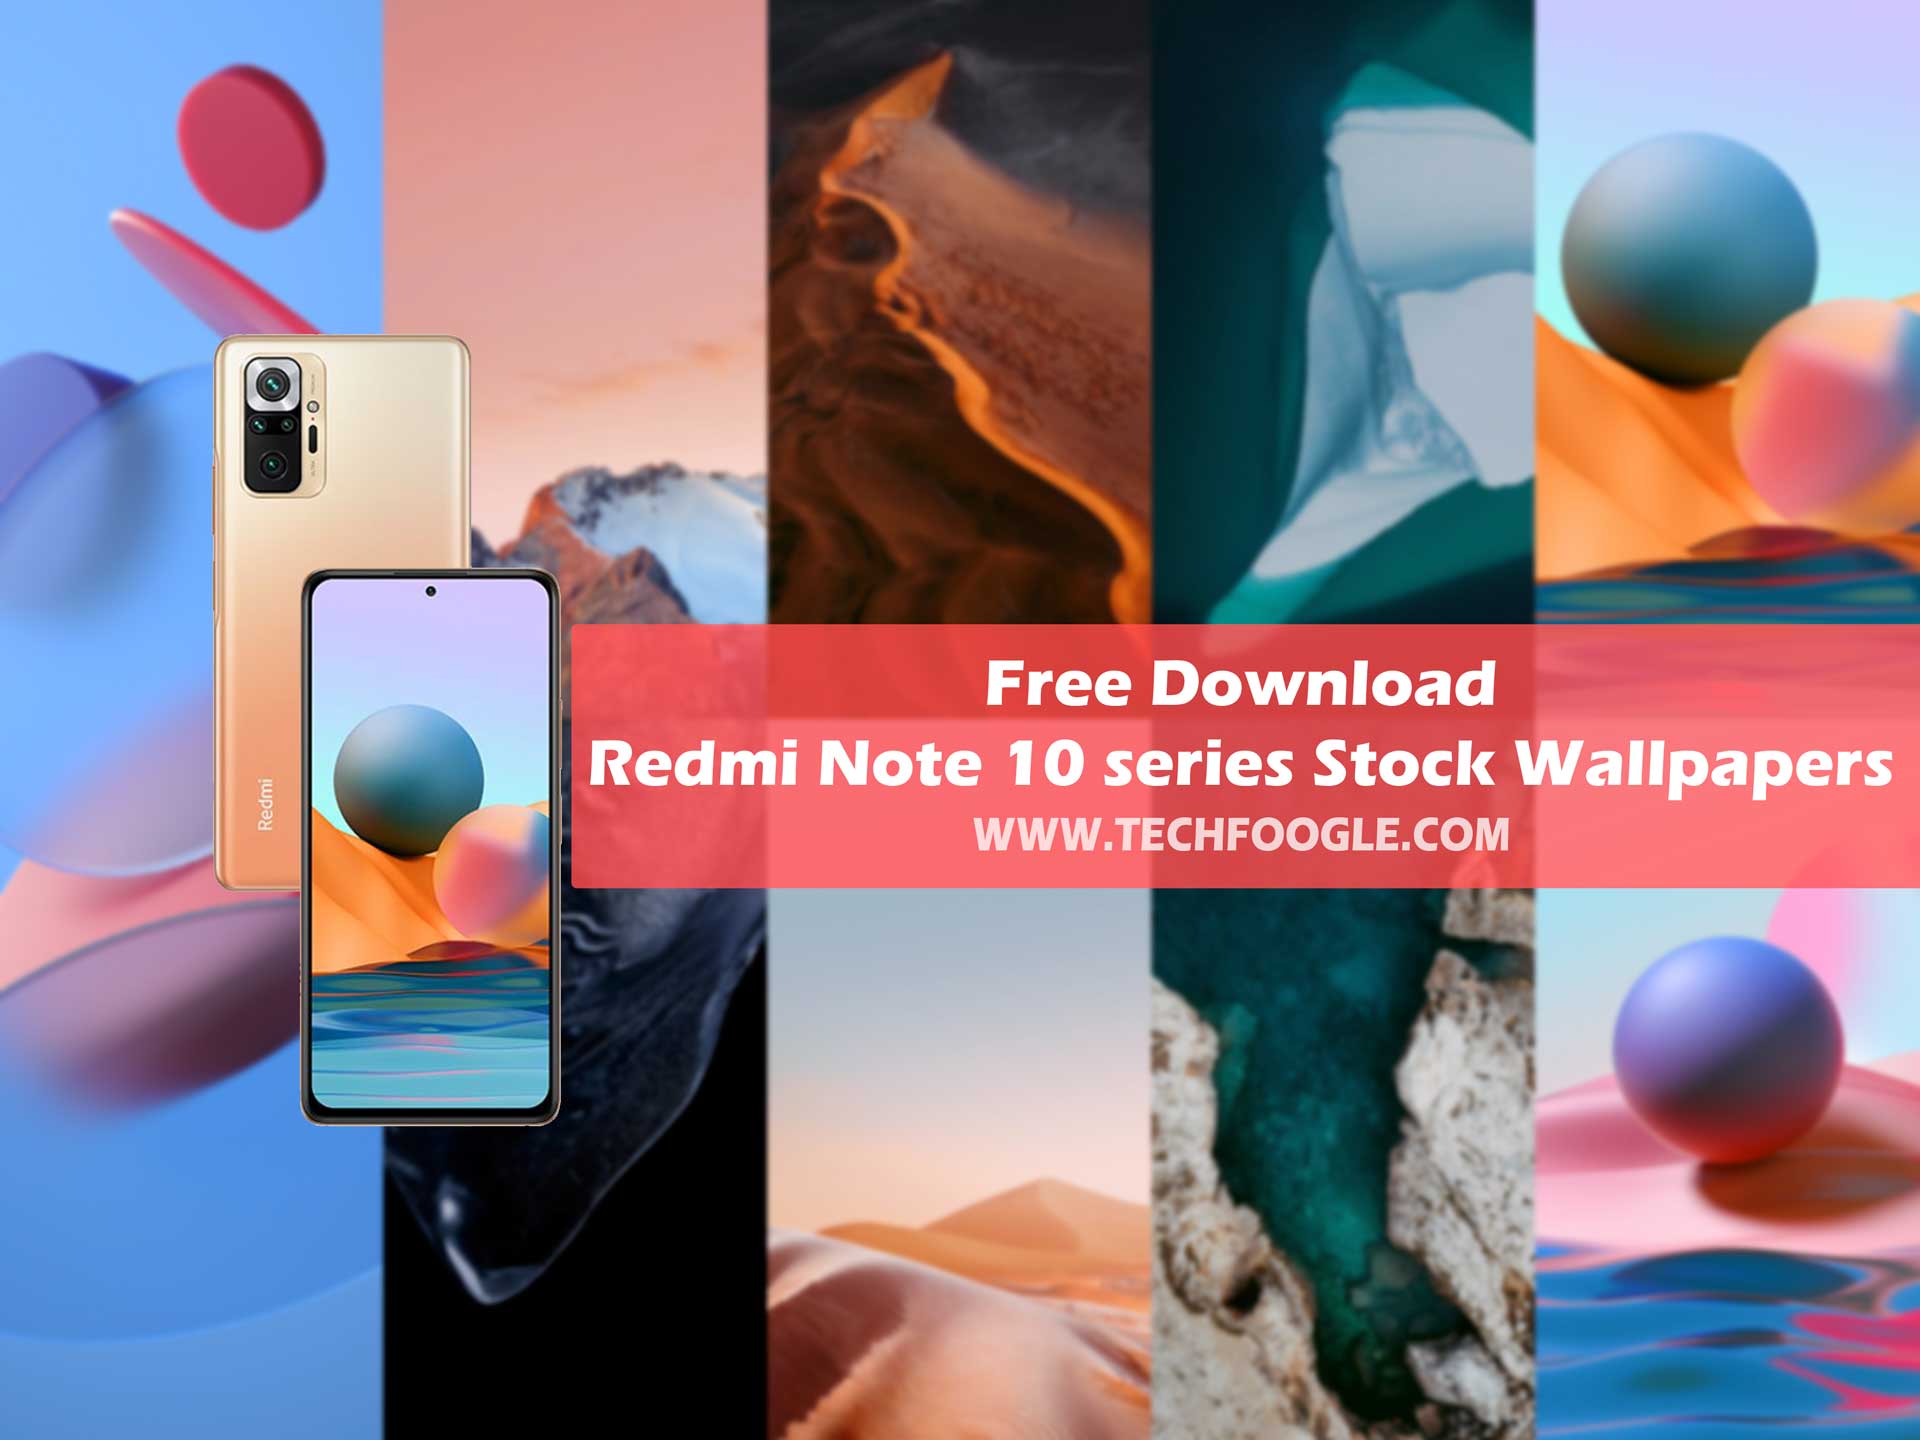 Free Download Redmi Note 10 series Stock Wallpapers [FHD+] - TechFoogle